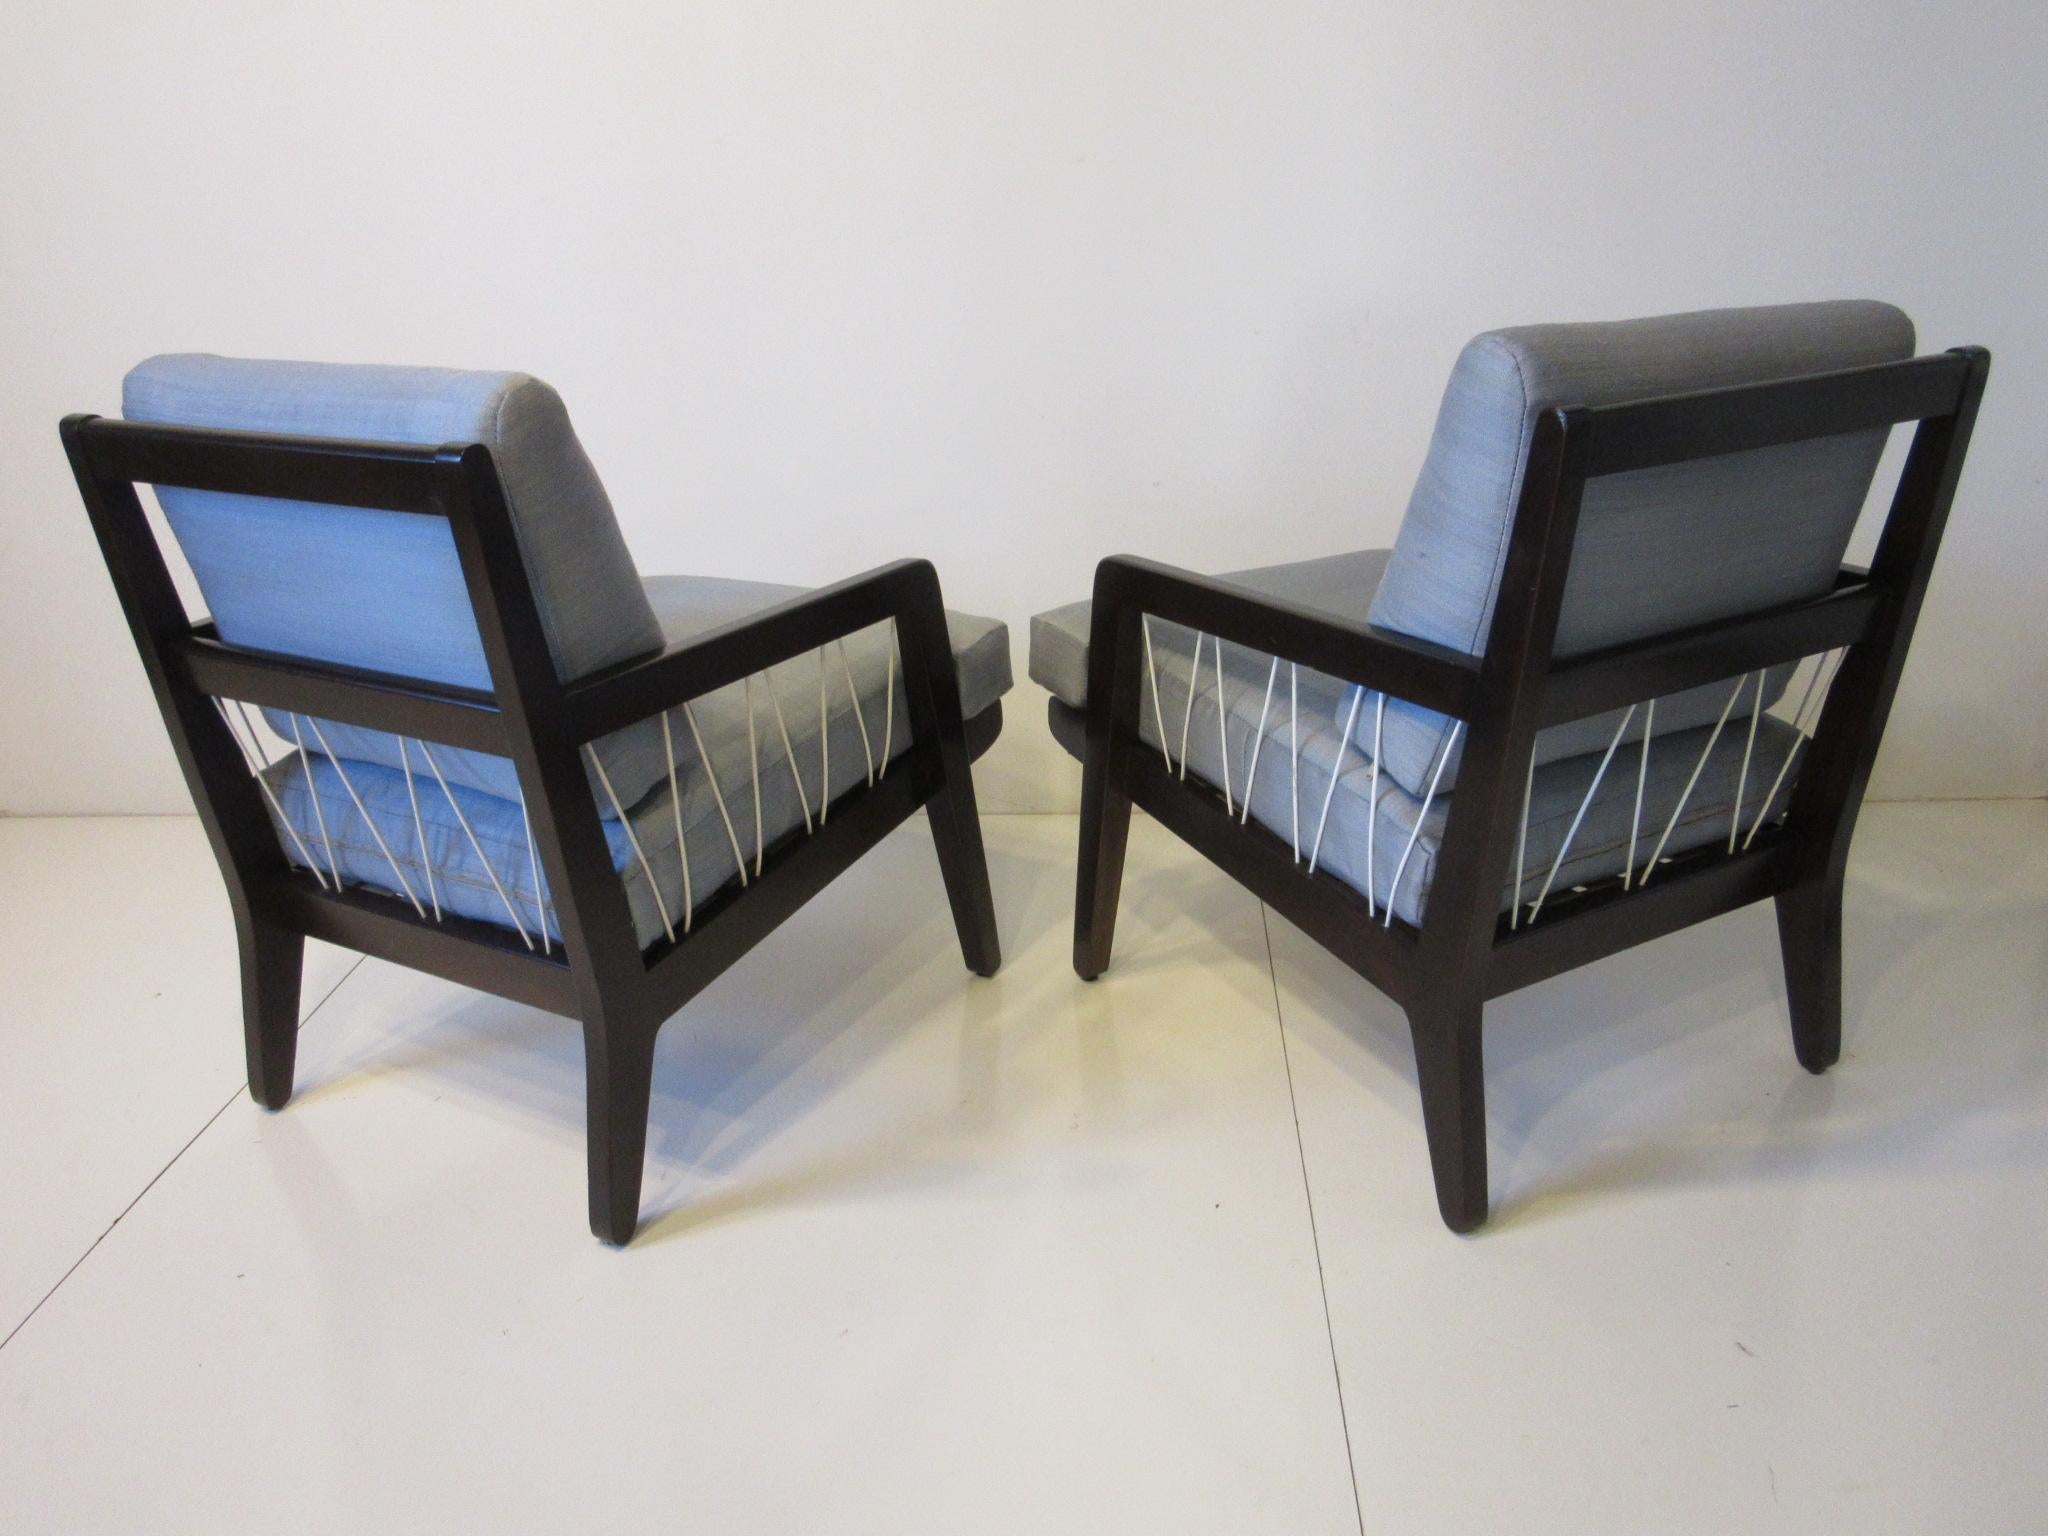 20th Century Edward Wormley Presedent Lounge Chairs for Drexel